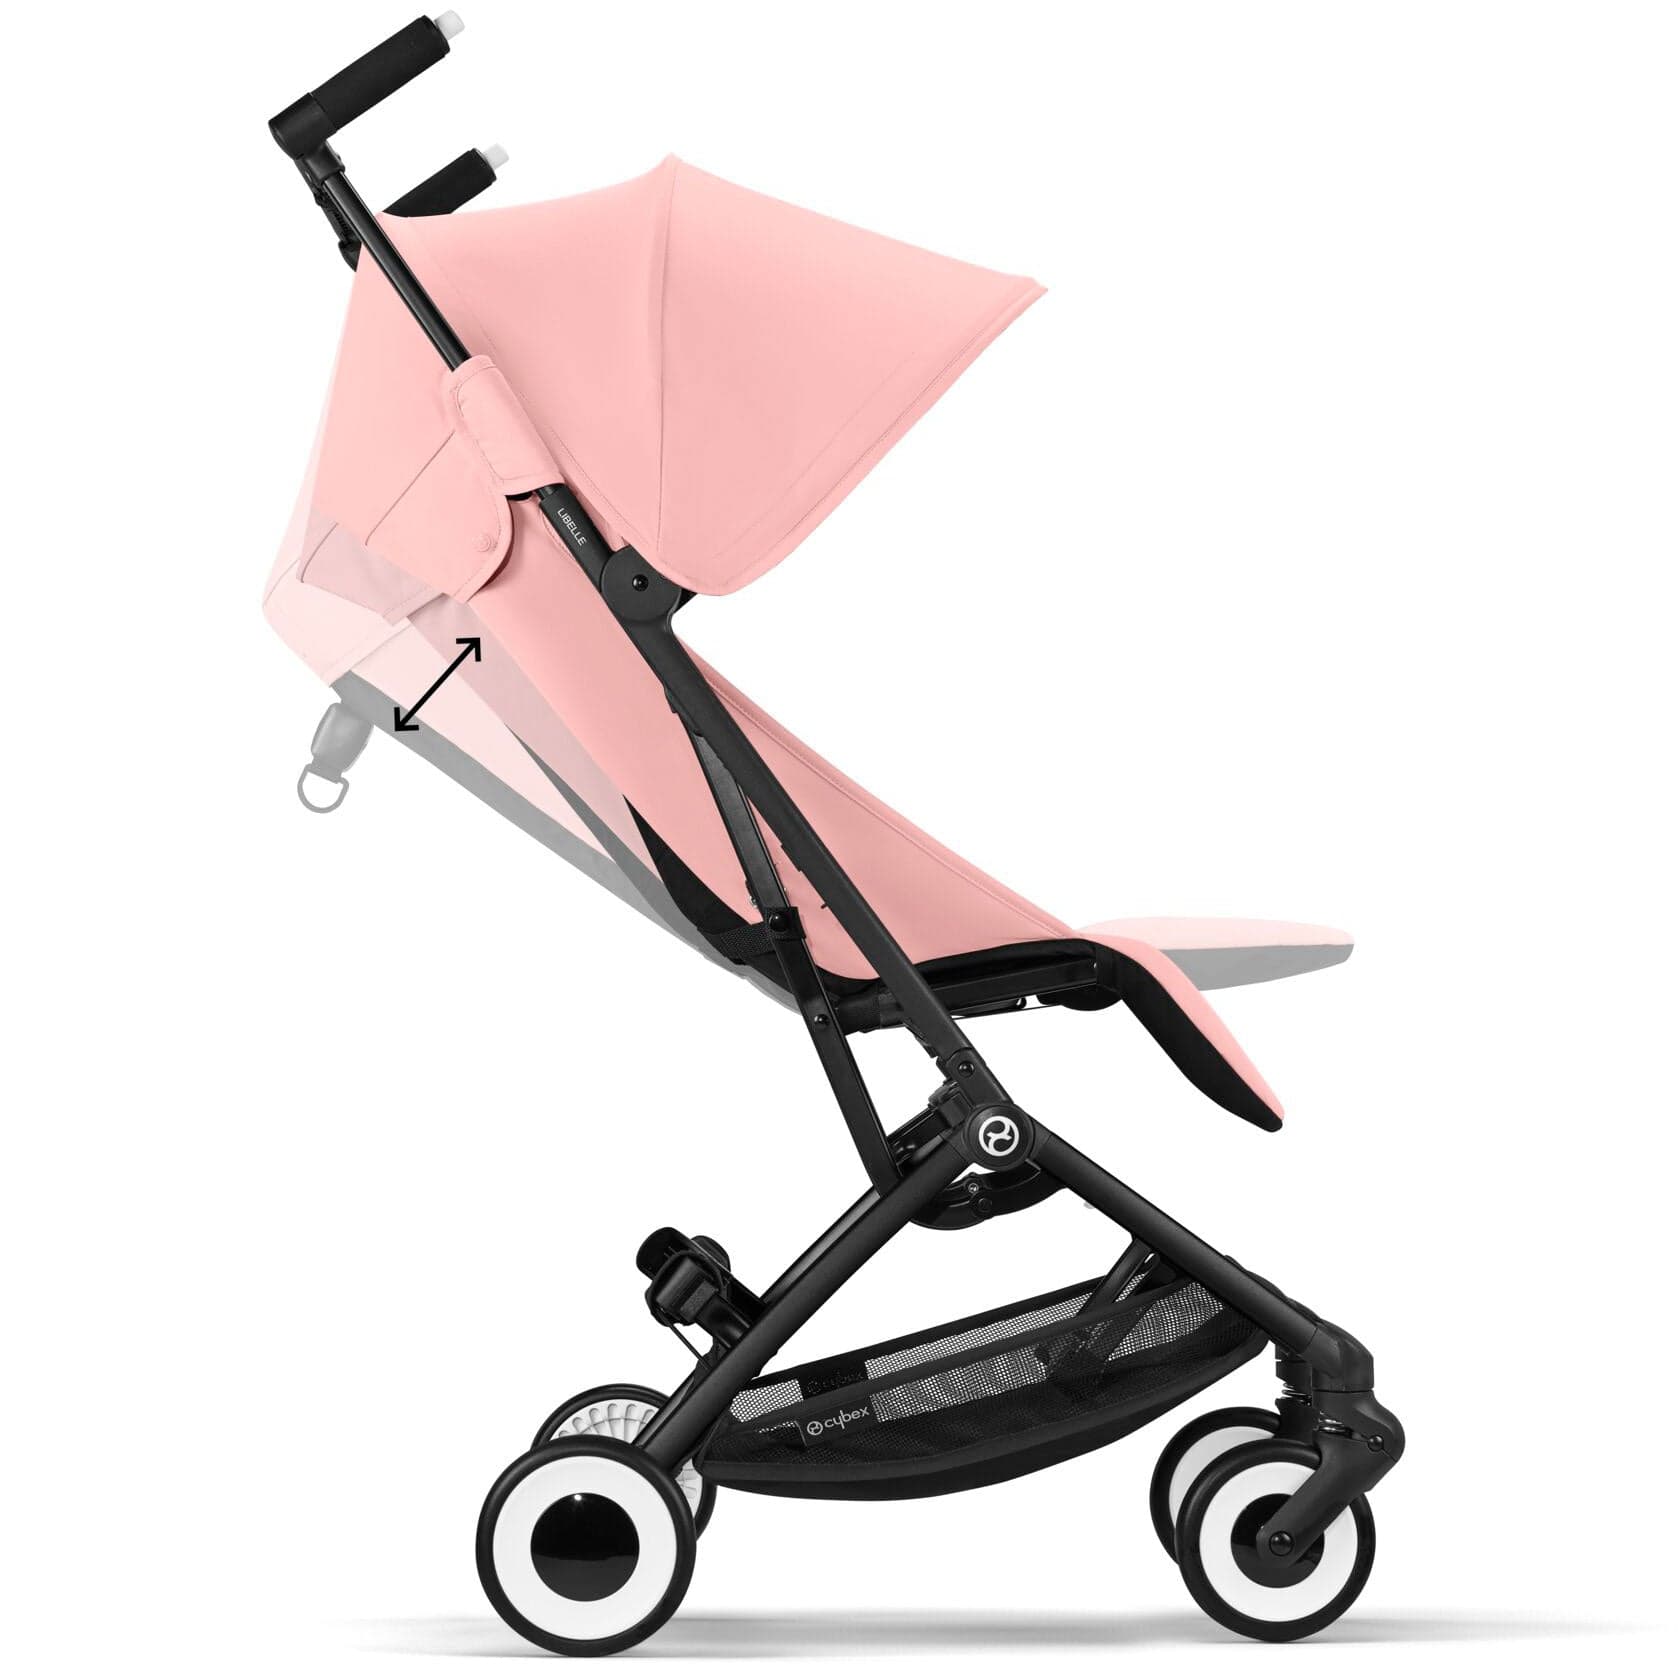 Cybex baby pushchairs Cybex Libelle Candy Pink 524000255